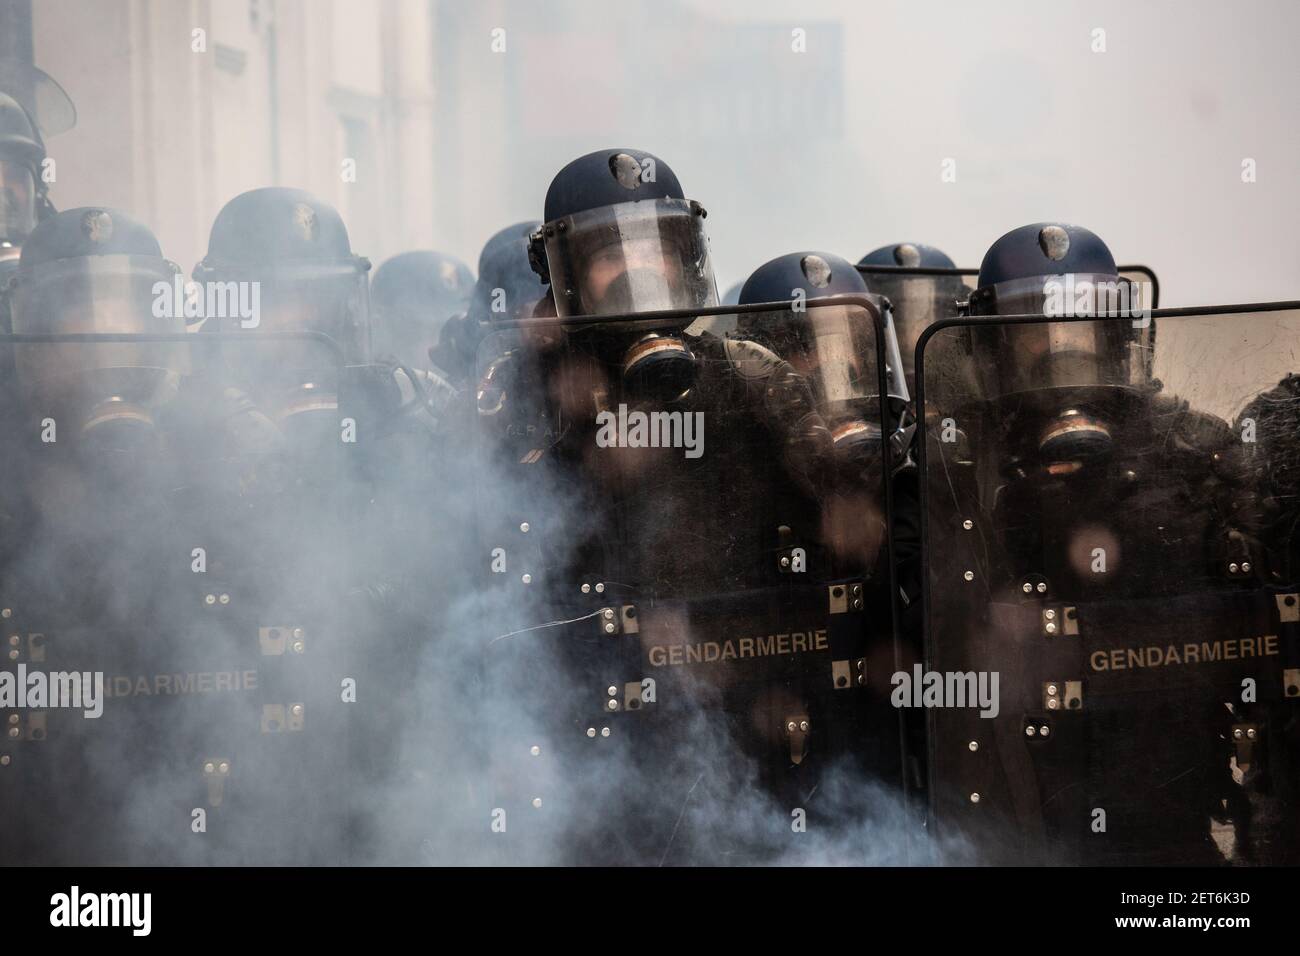 French riot-policemen with gas masks and shields stand guard, during the anti-government demonstrations in Paris, France, December 08, 2018. The withdrawal of French President Emmanuel Macron from implementing the Polluting Fuels tax, had very little to no effect on calming the tense situation in France as mass violent demonstrations continue to take place through several flashpoints across the country. In the French capital, members of the 'Yellow Jackets' movement along side high school students (protesting the education reform) and other citizens took to the streets. Stock Photo